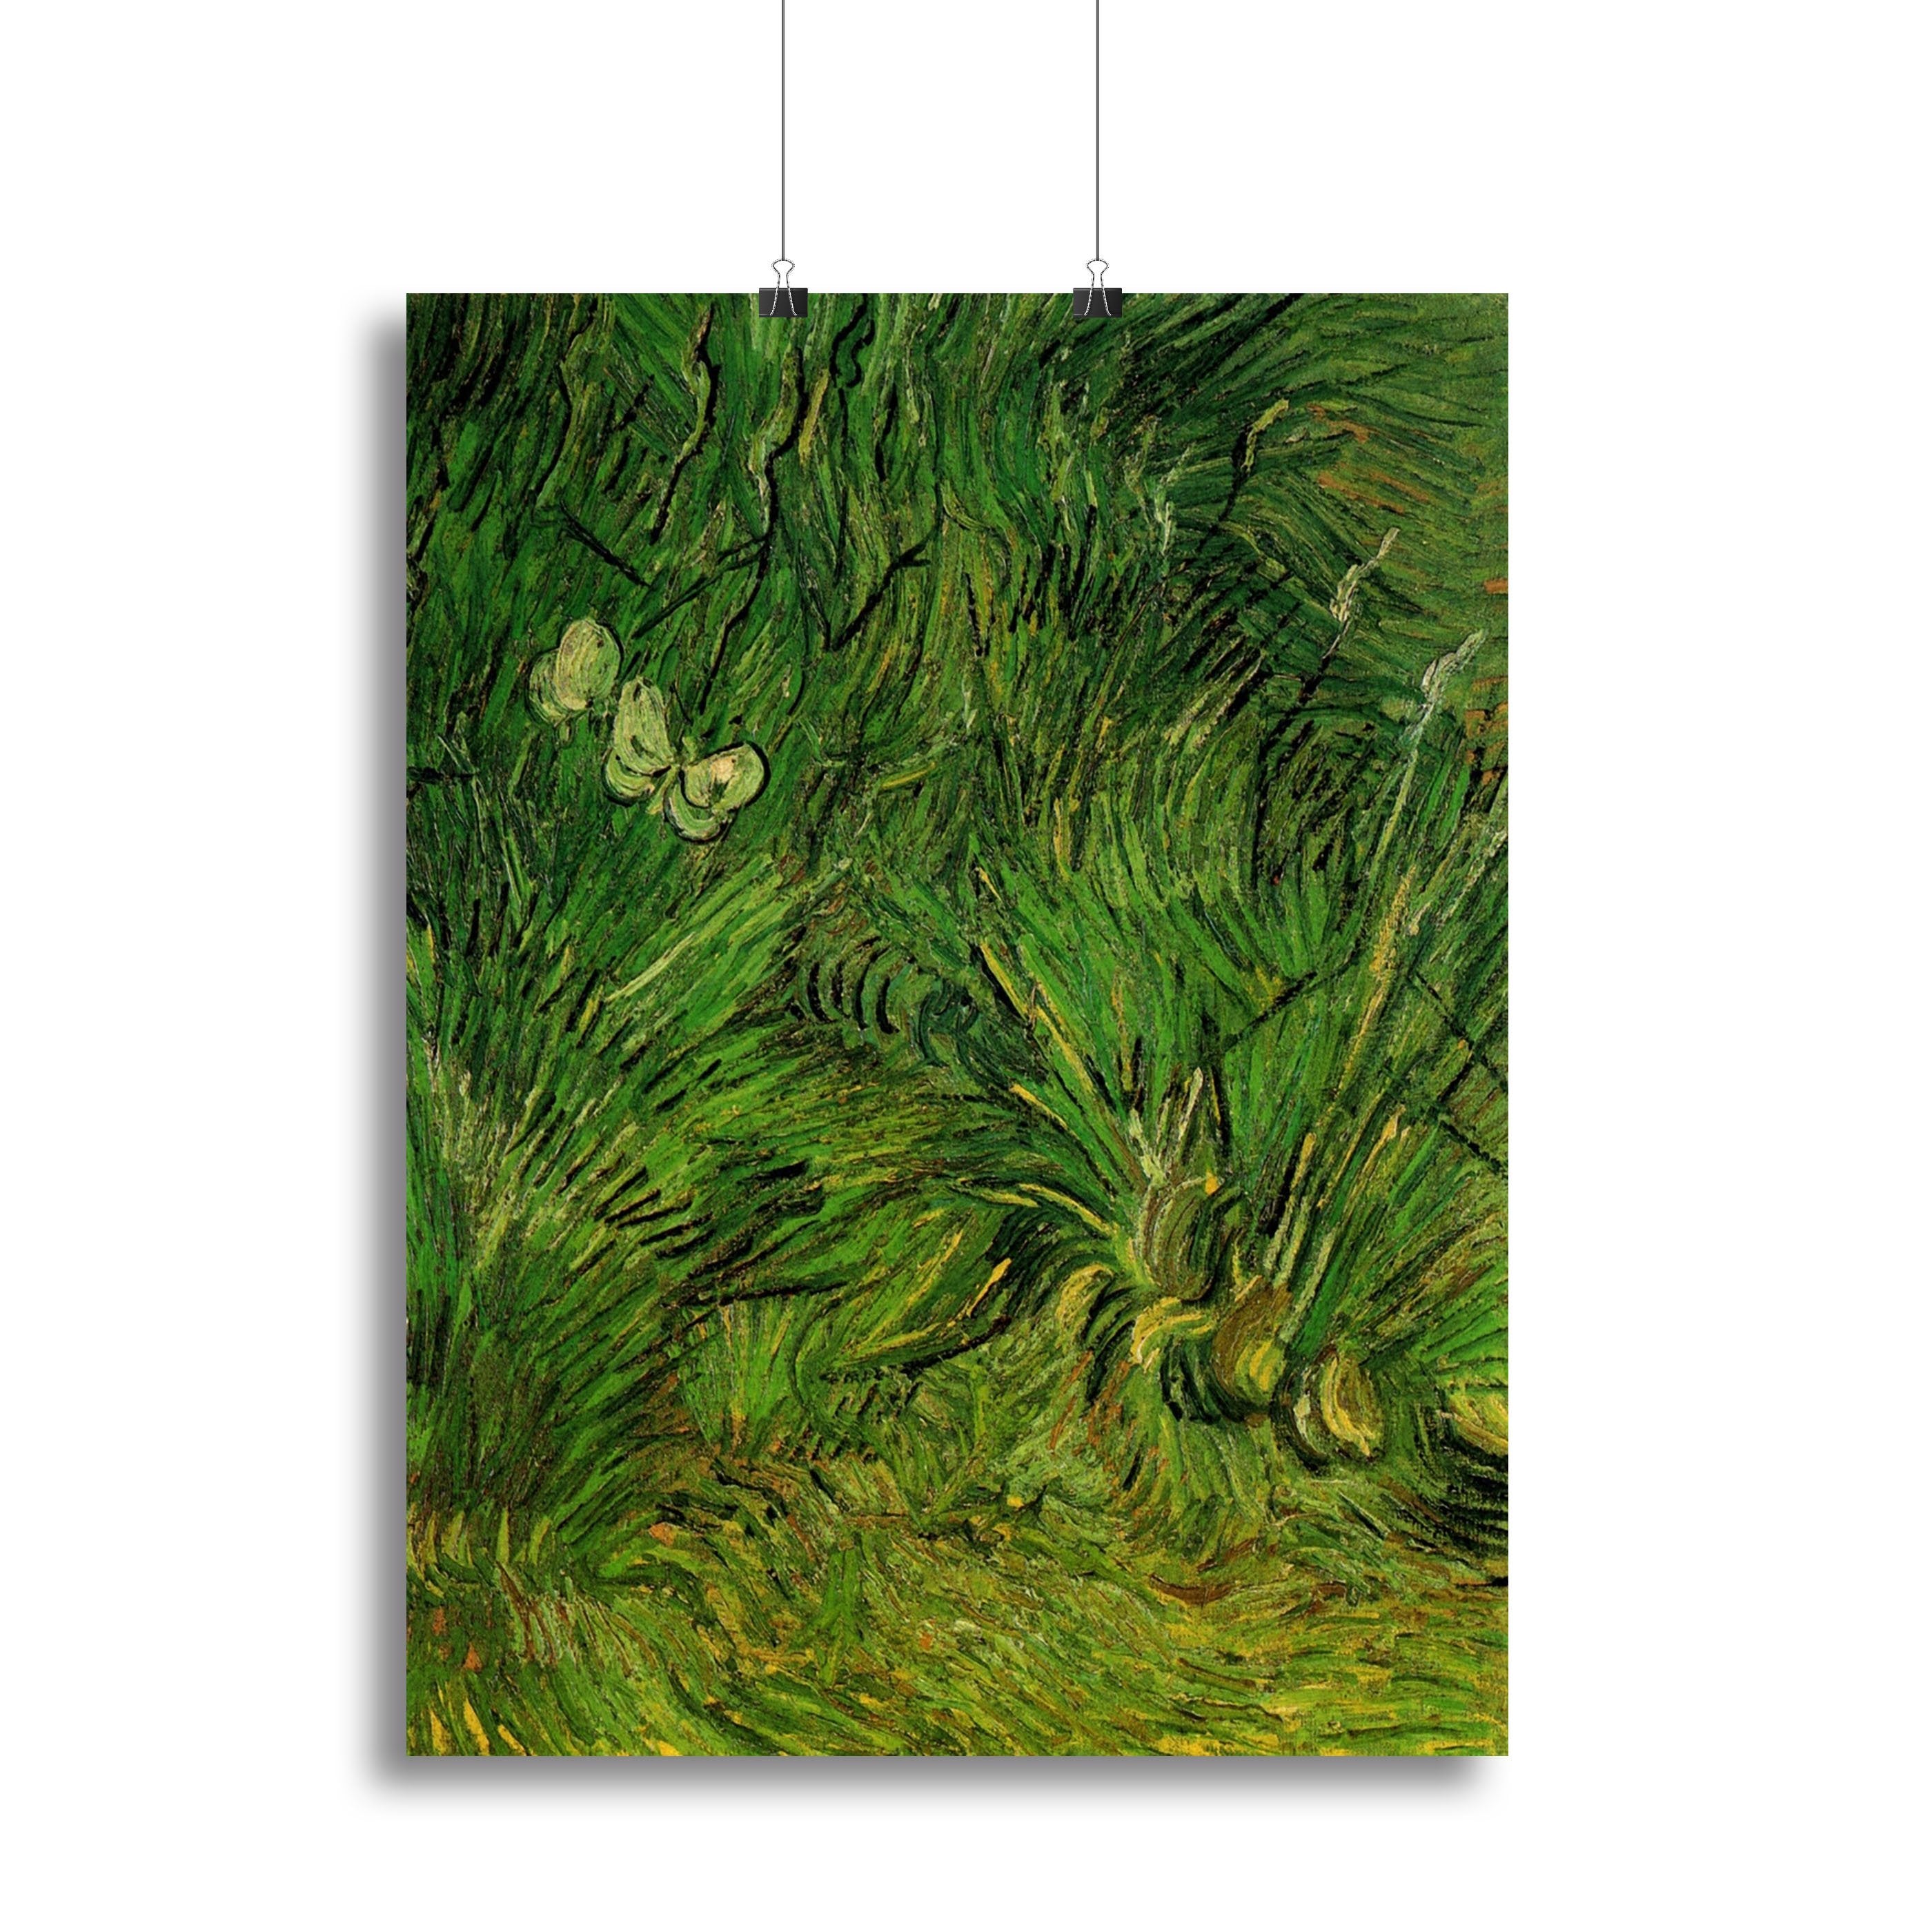 Two White Butterflies by Van Gogh Canvas Print or Poster